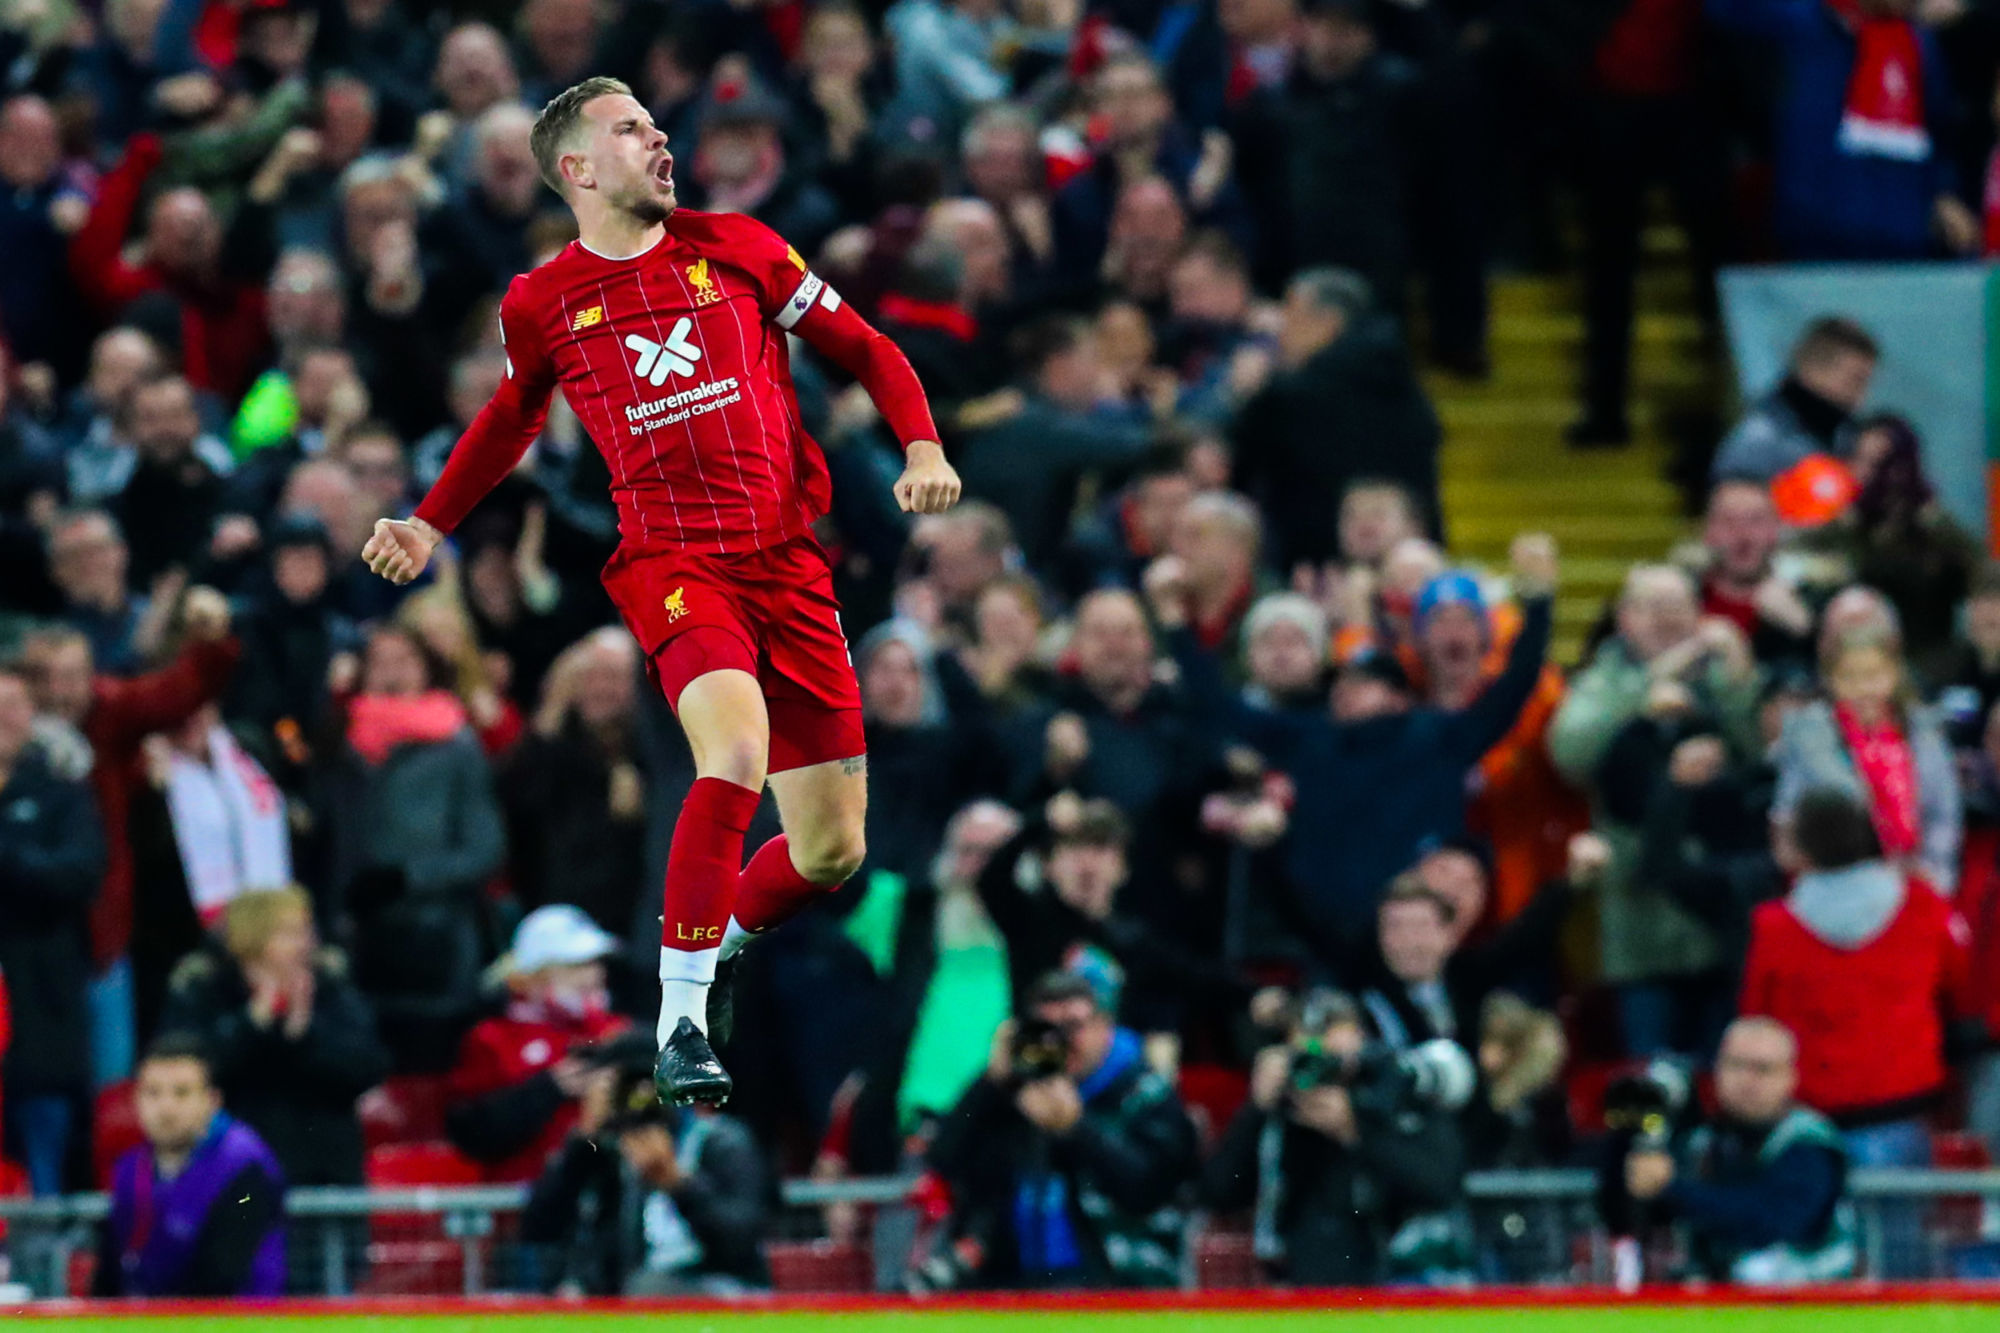 27th October 2019; Anfield, Liverpool, Merseyside, England; English Premier League Football, Liverpool versus Tottenham Hotspur; Jordan Henderson of Liverpool leaps and punches the air after scoring his team's equalising goal after 52 minutes - Strictly Editorial Use Only. No use with unauthorized audio, video, data, fixture lists, club/league logos or 'live' services. Online in-match use limited to 120 images, no video emulation. No use in betting, games or single club/league/player publications 


Photo by Icon Sport - Jordan HENDERSON - Anfield Road - Liverpool (Angleterre)